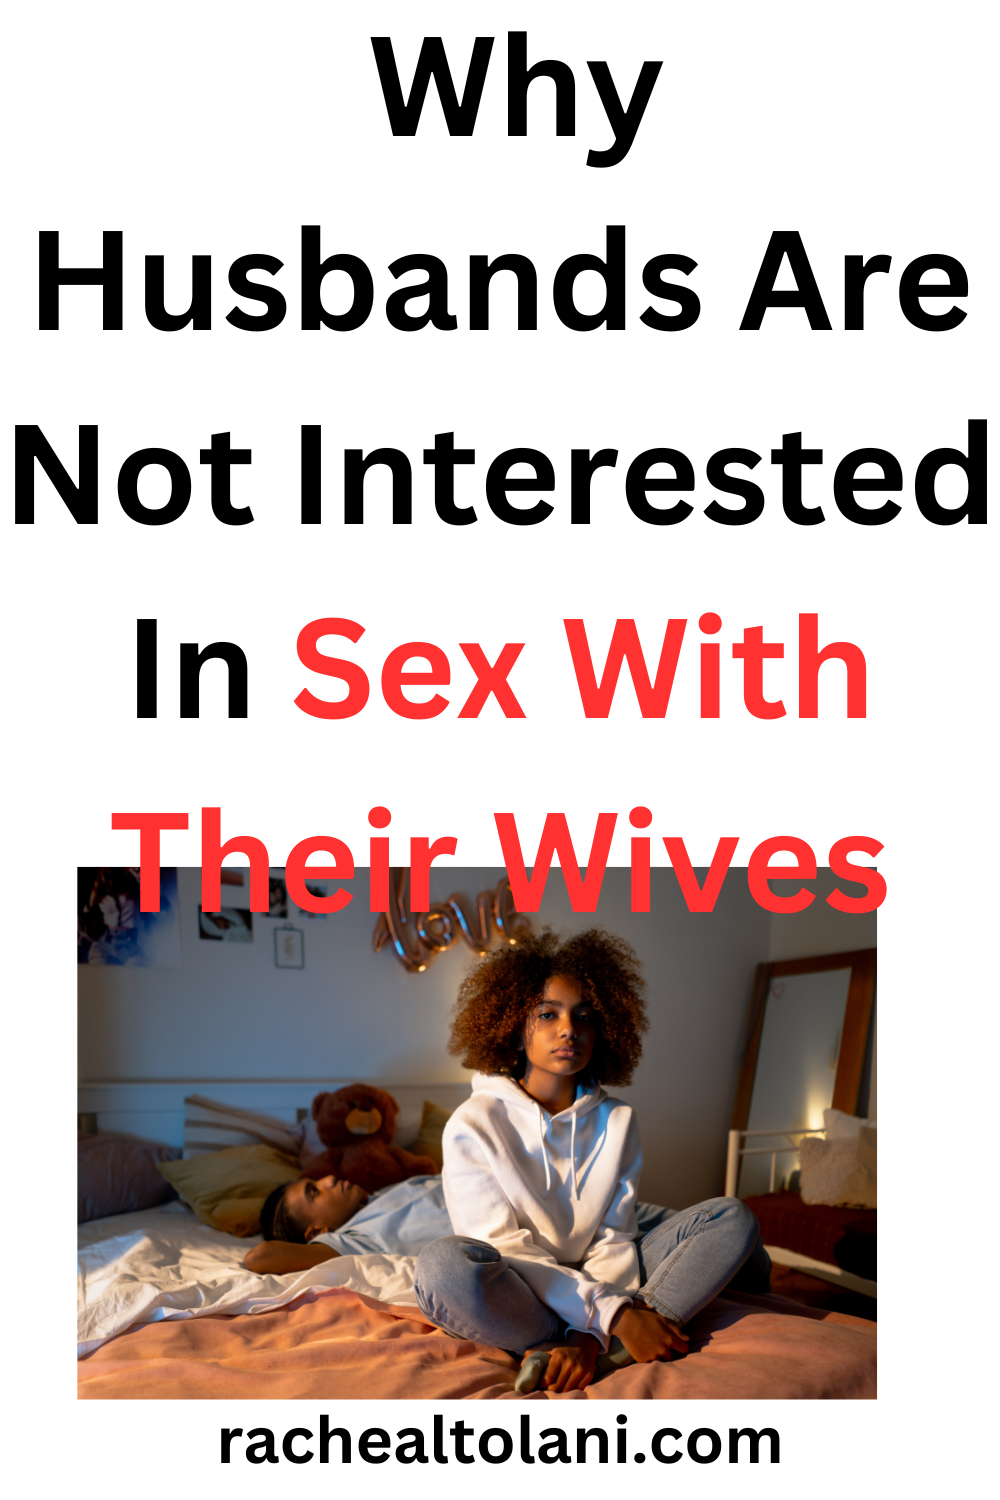 7 Reasons Why Men Lose Interest In Sex - image pic